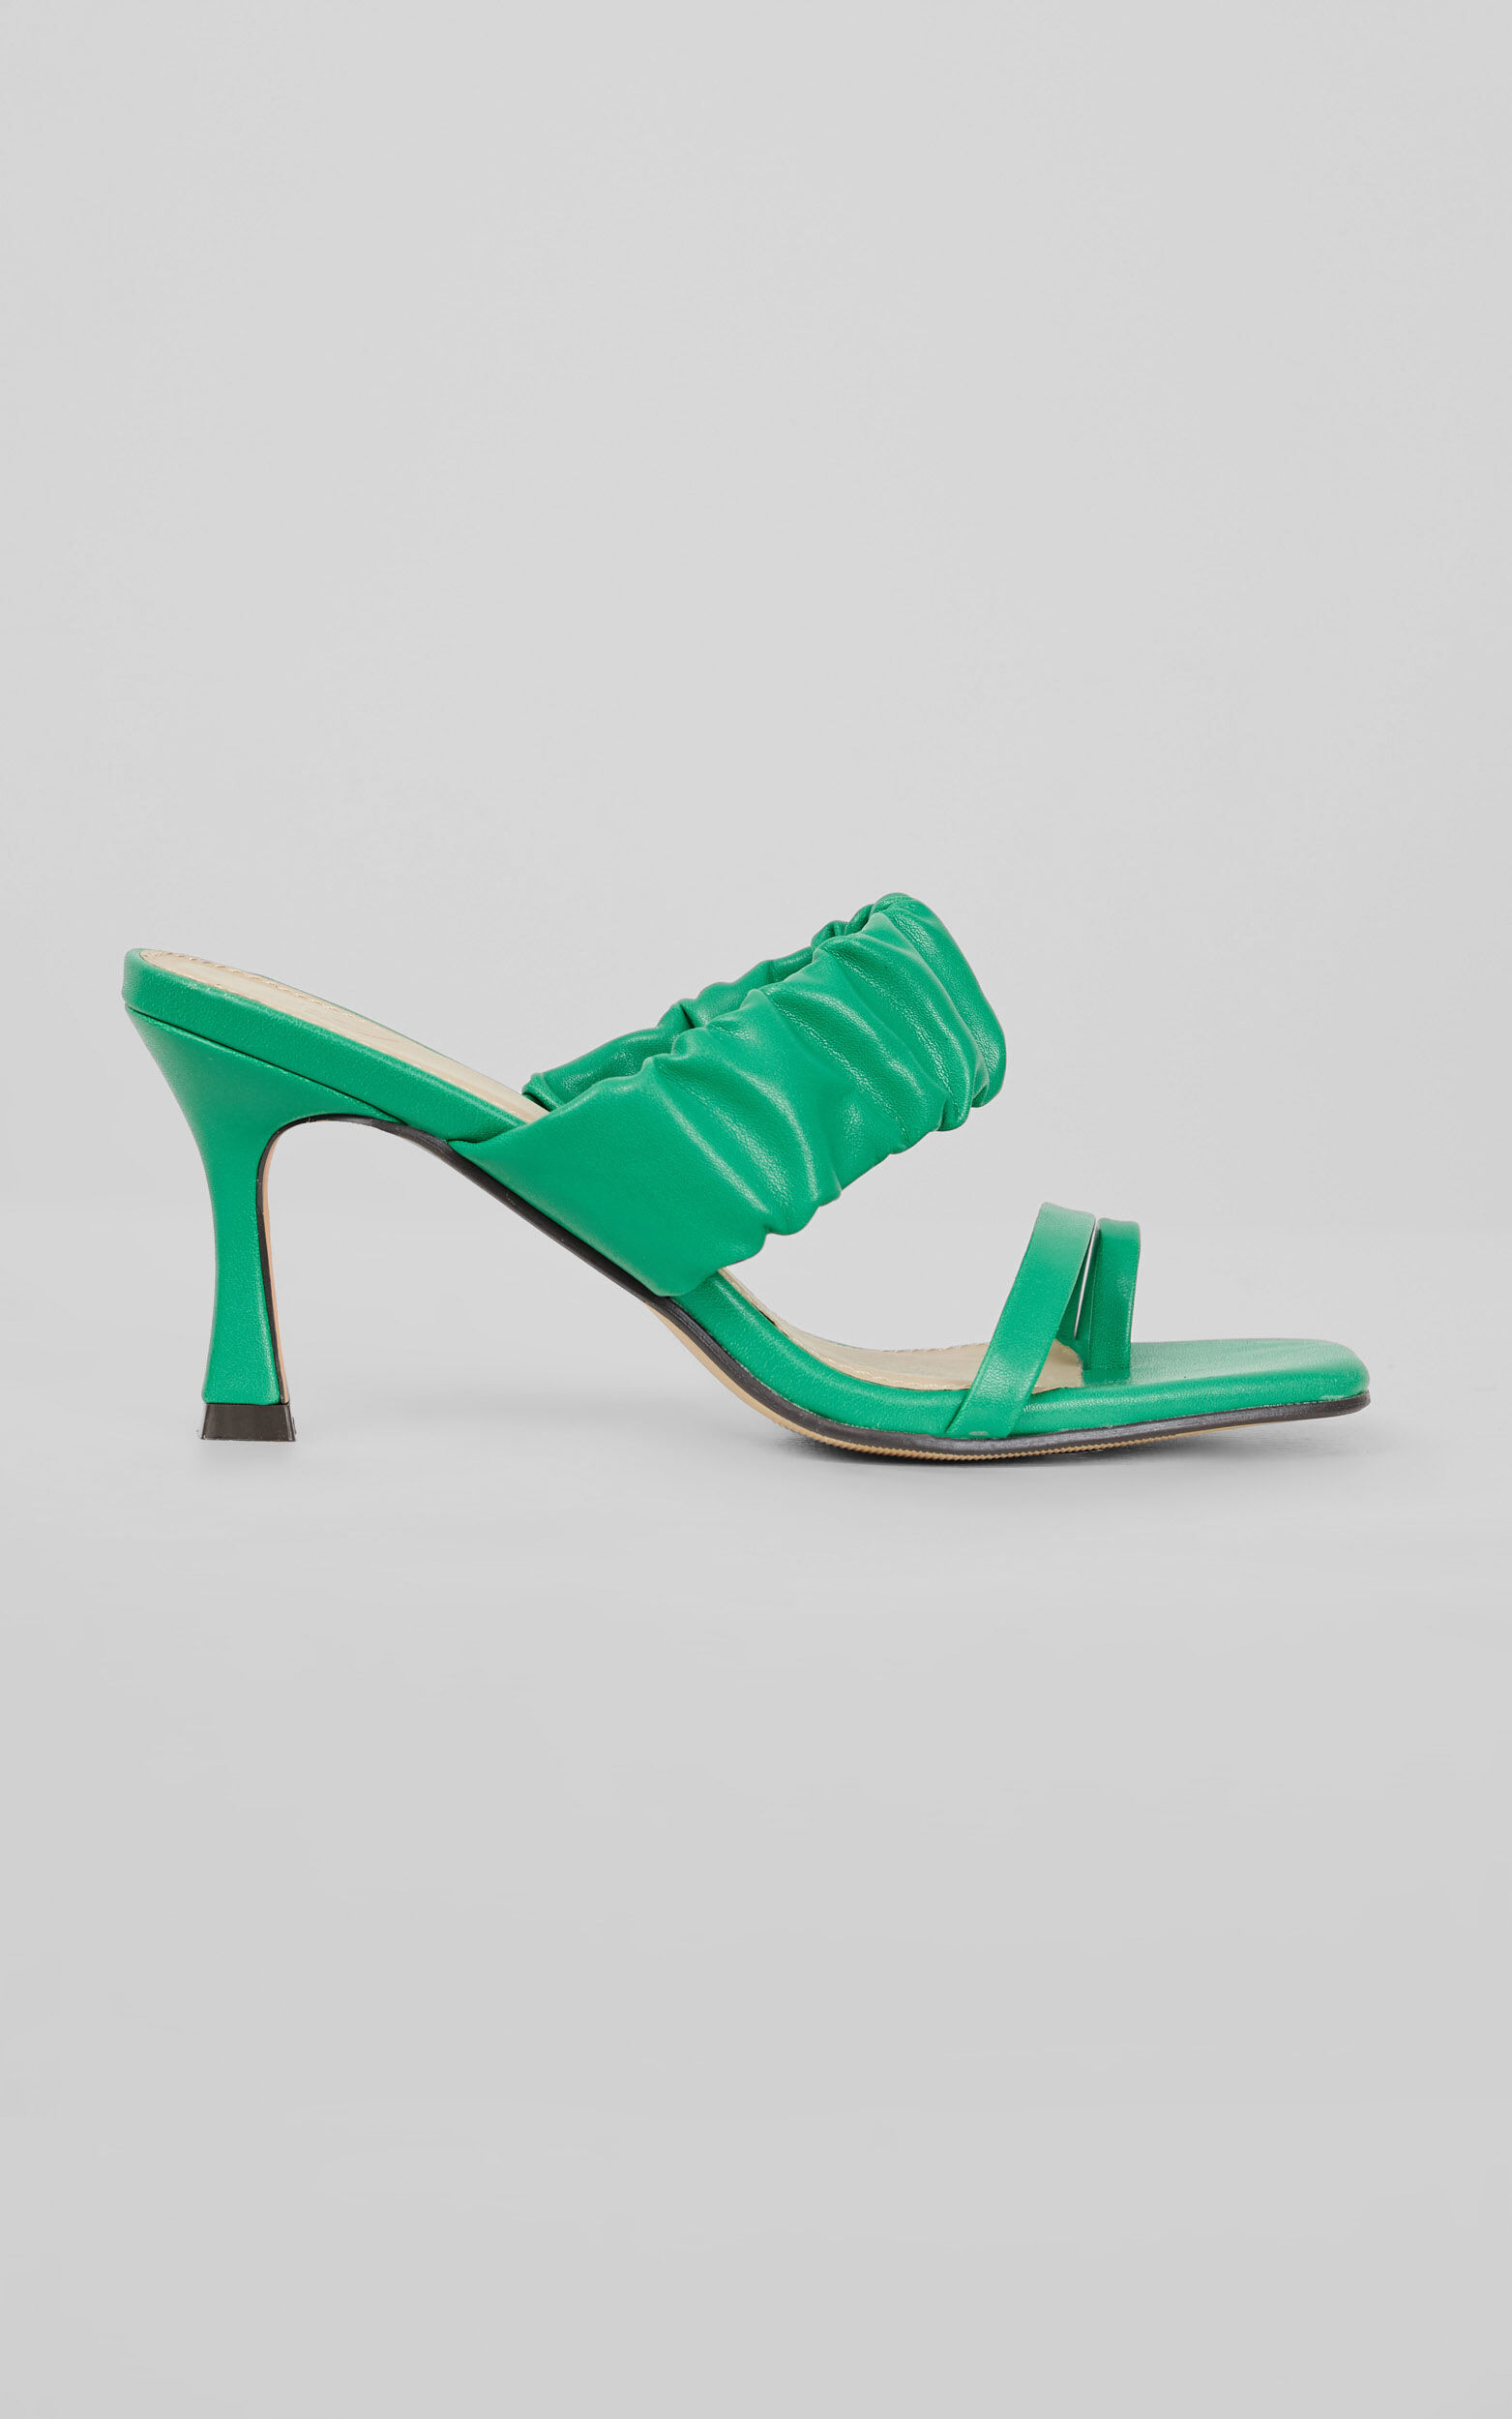 4th & Reckless - Riva Mule Heels in Green - 05, GRN2, super-hi-res image number null